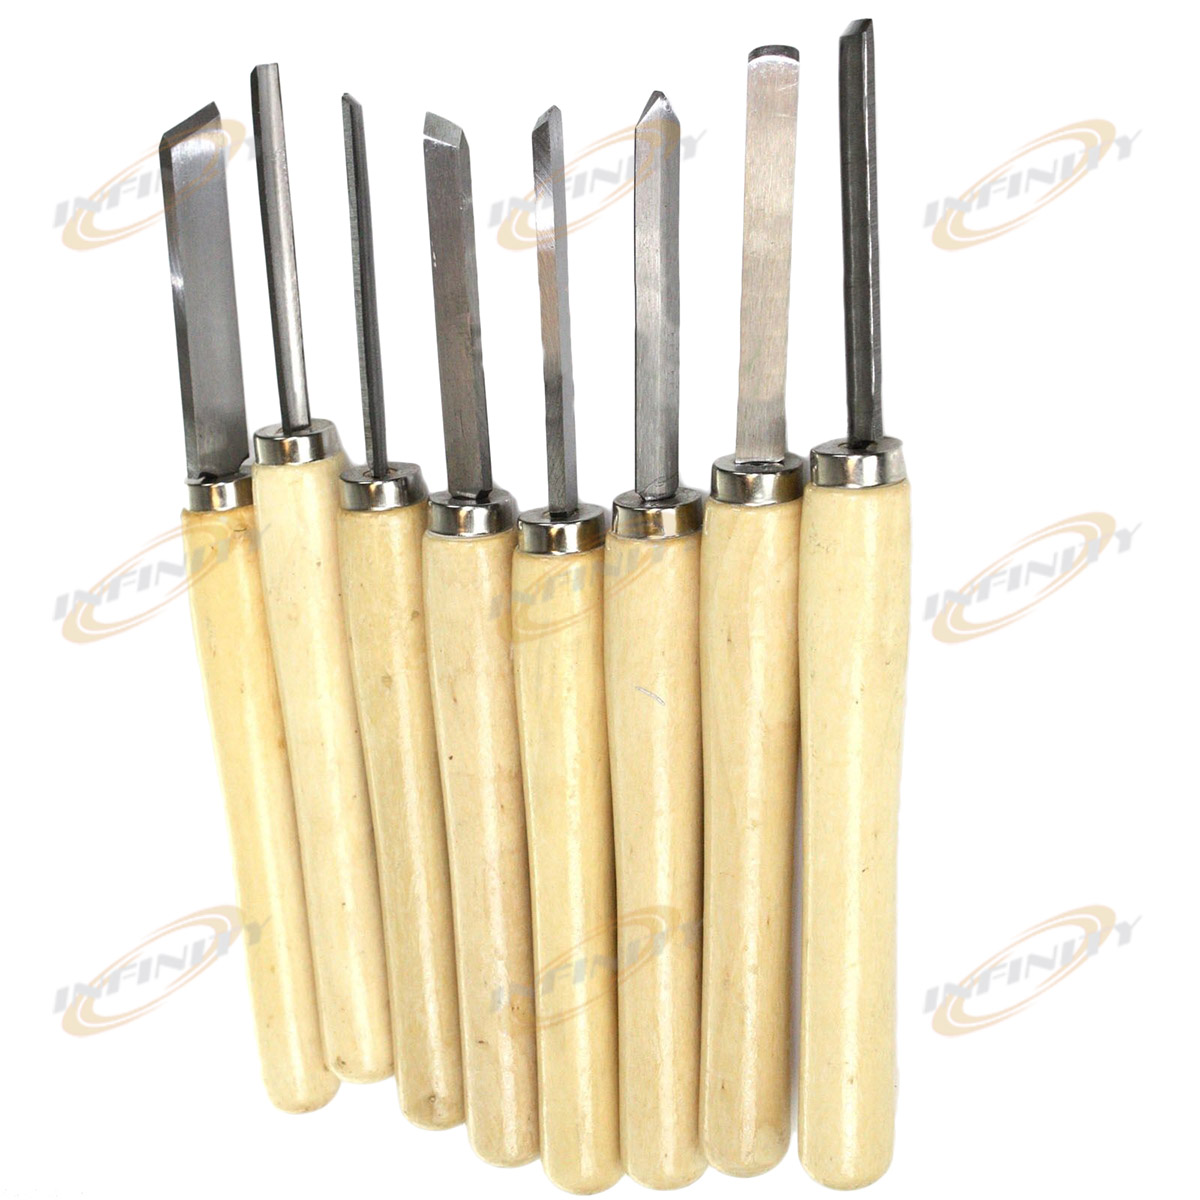  wood lathe chisel set skew spear point round nose gouge parting tool